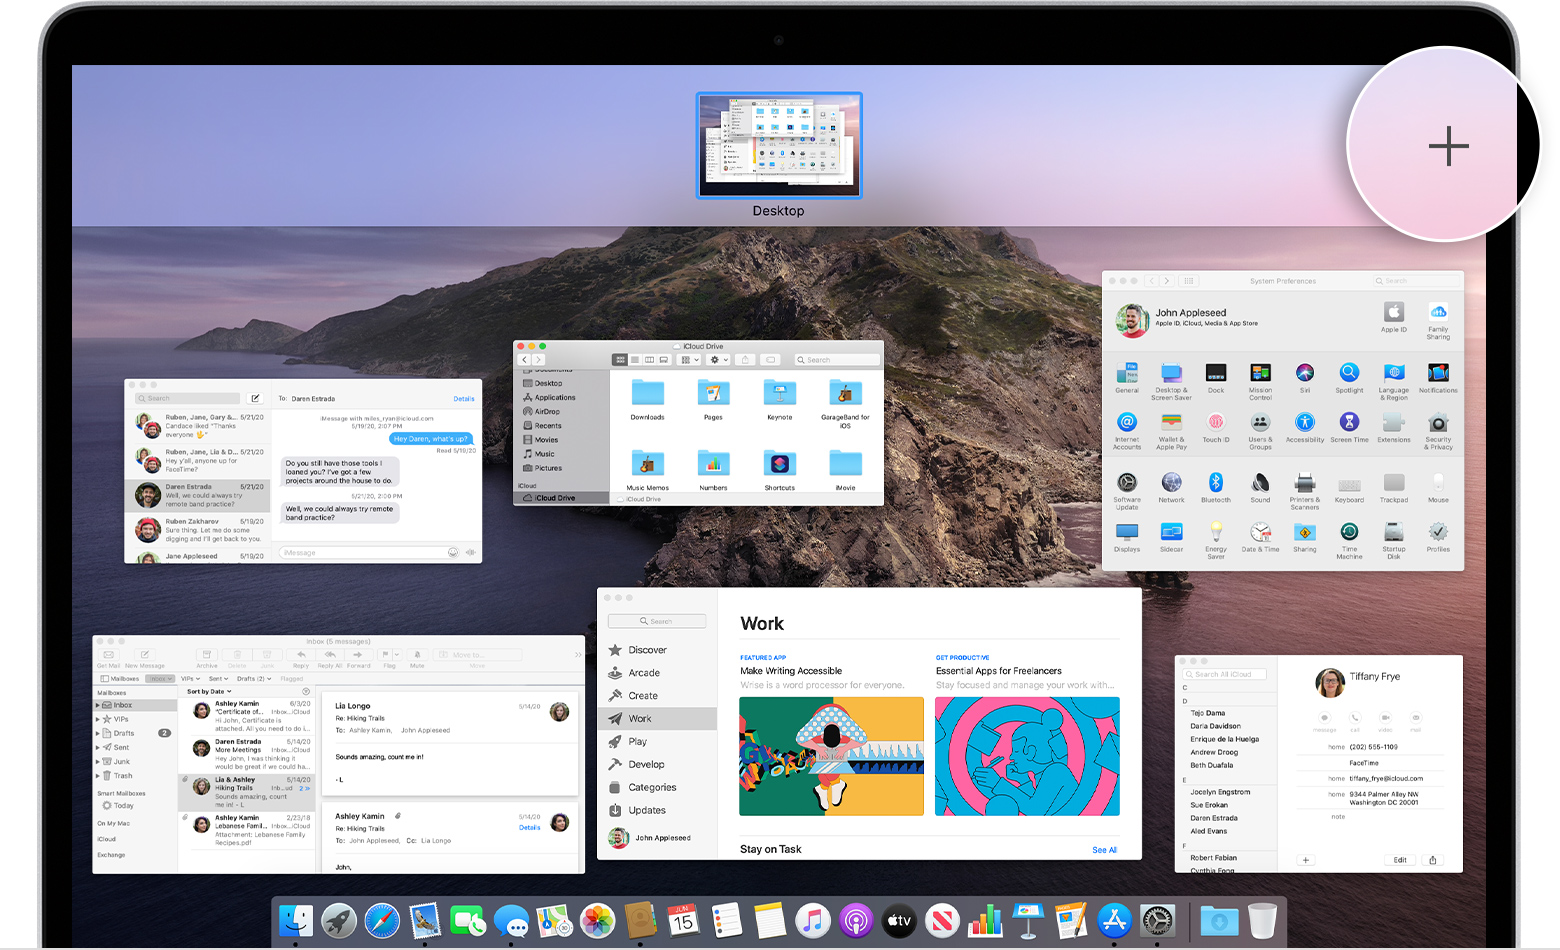 How to use Mission Control on a Mac